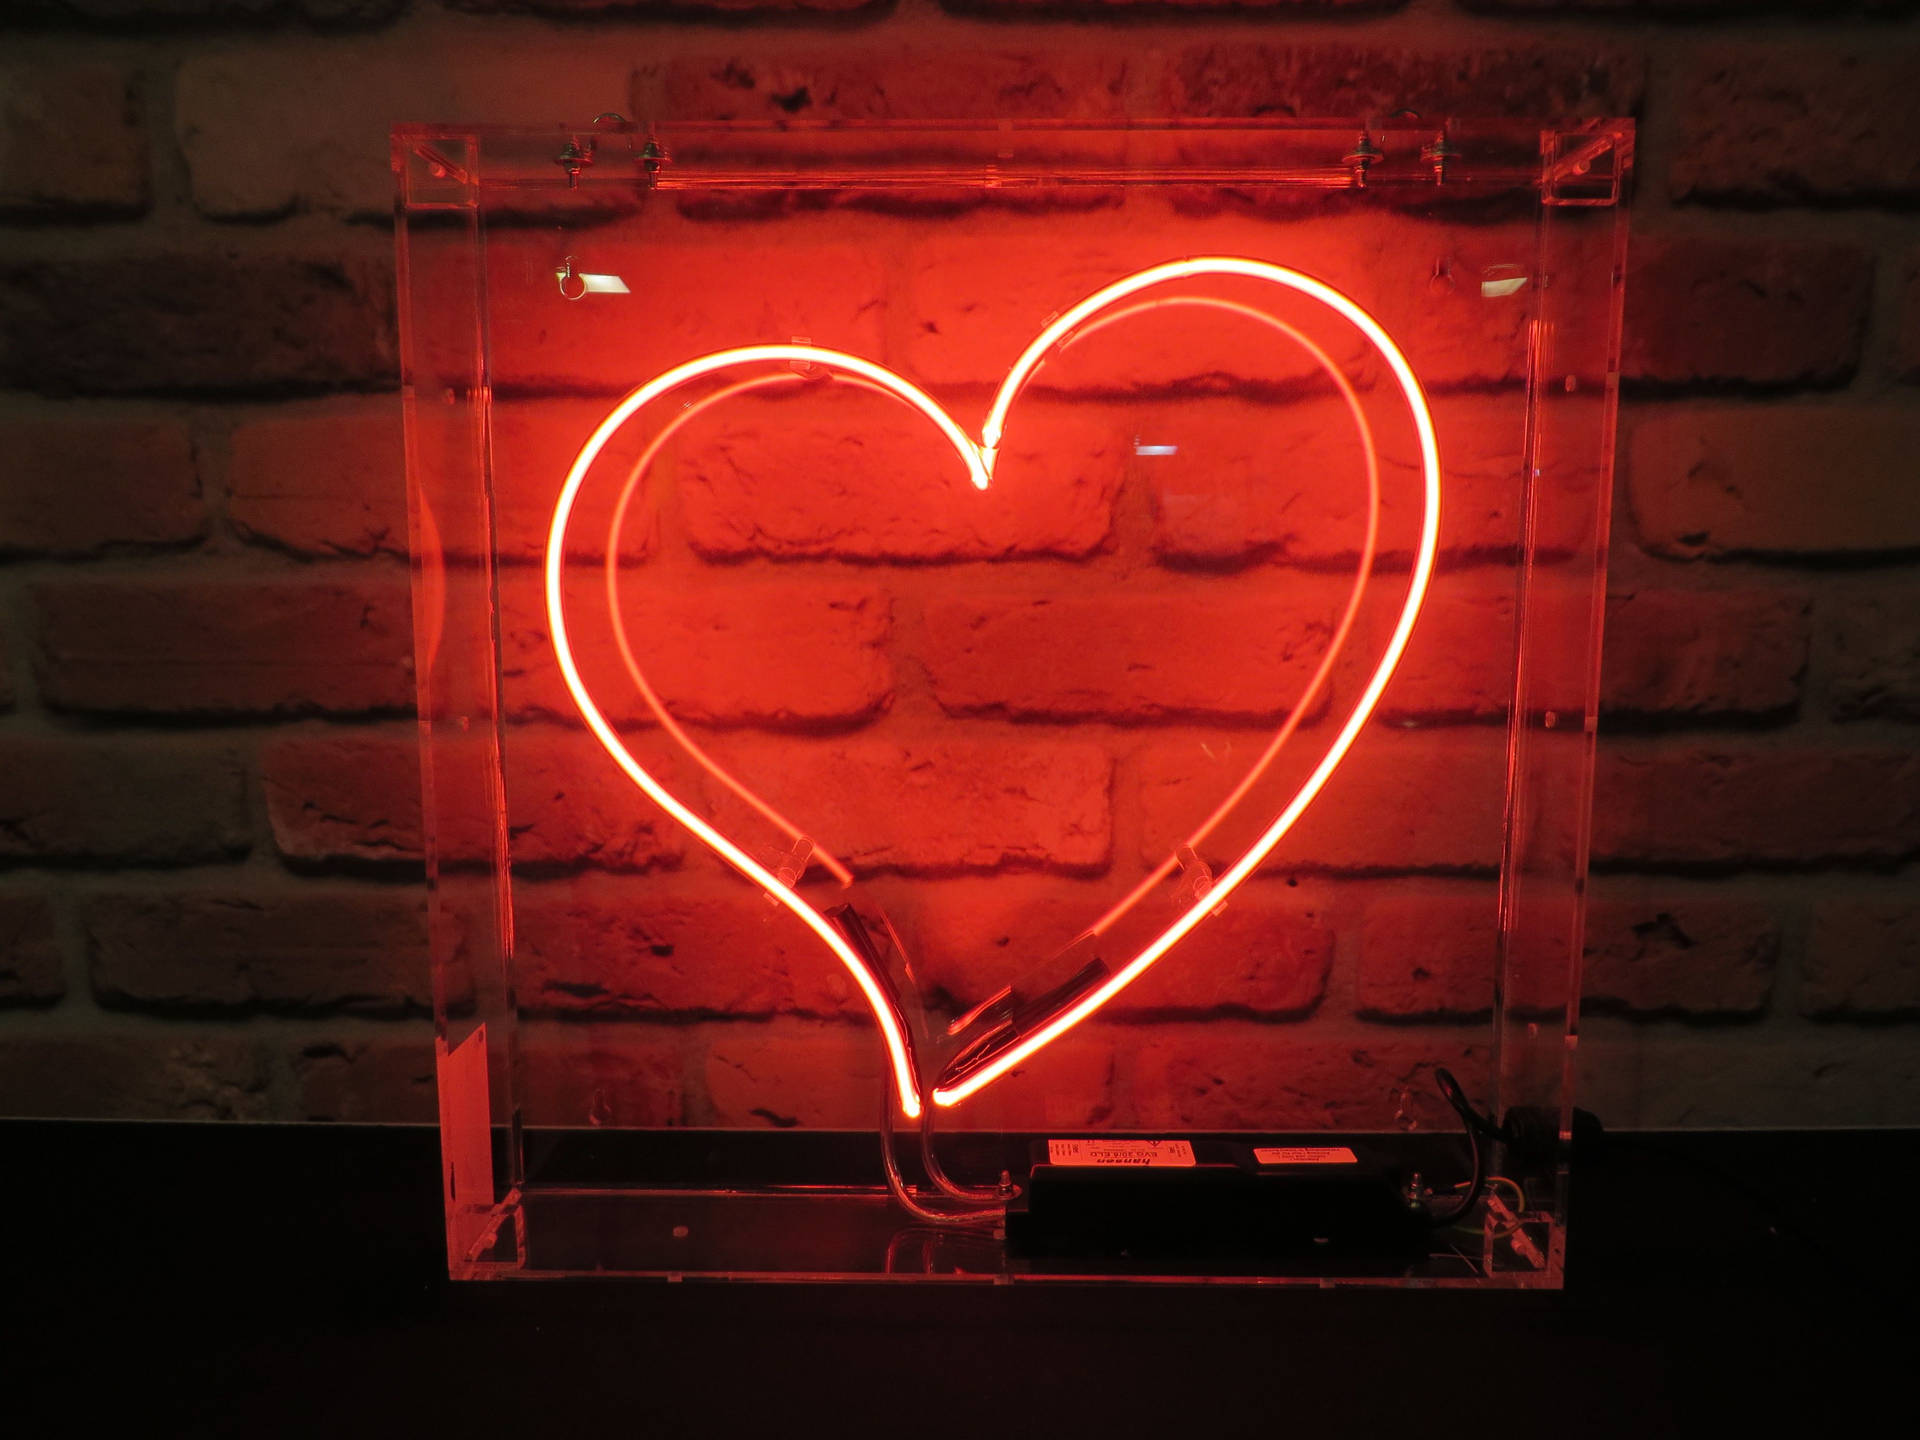 Neon heart Images - Search Images on Everypixel